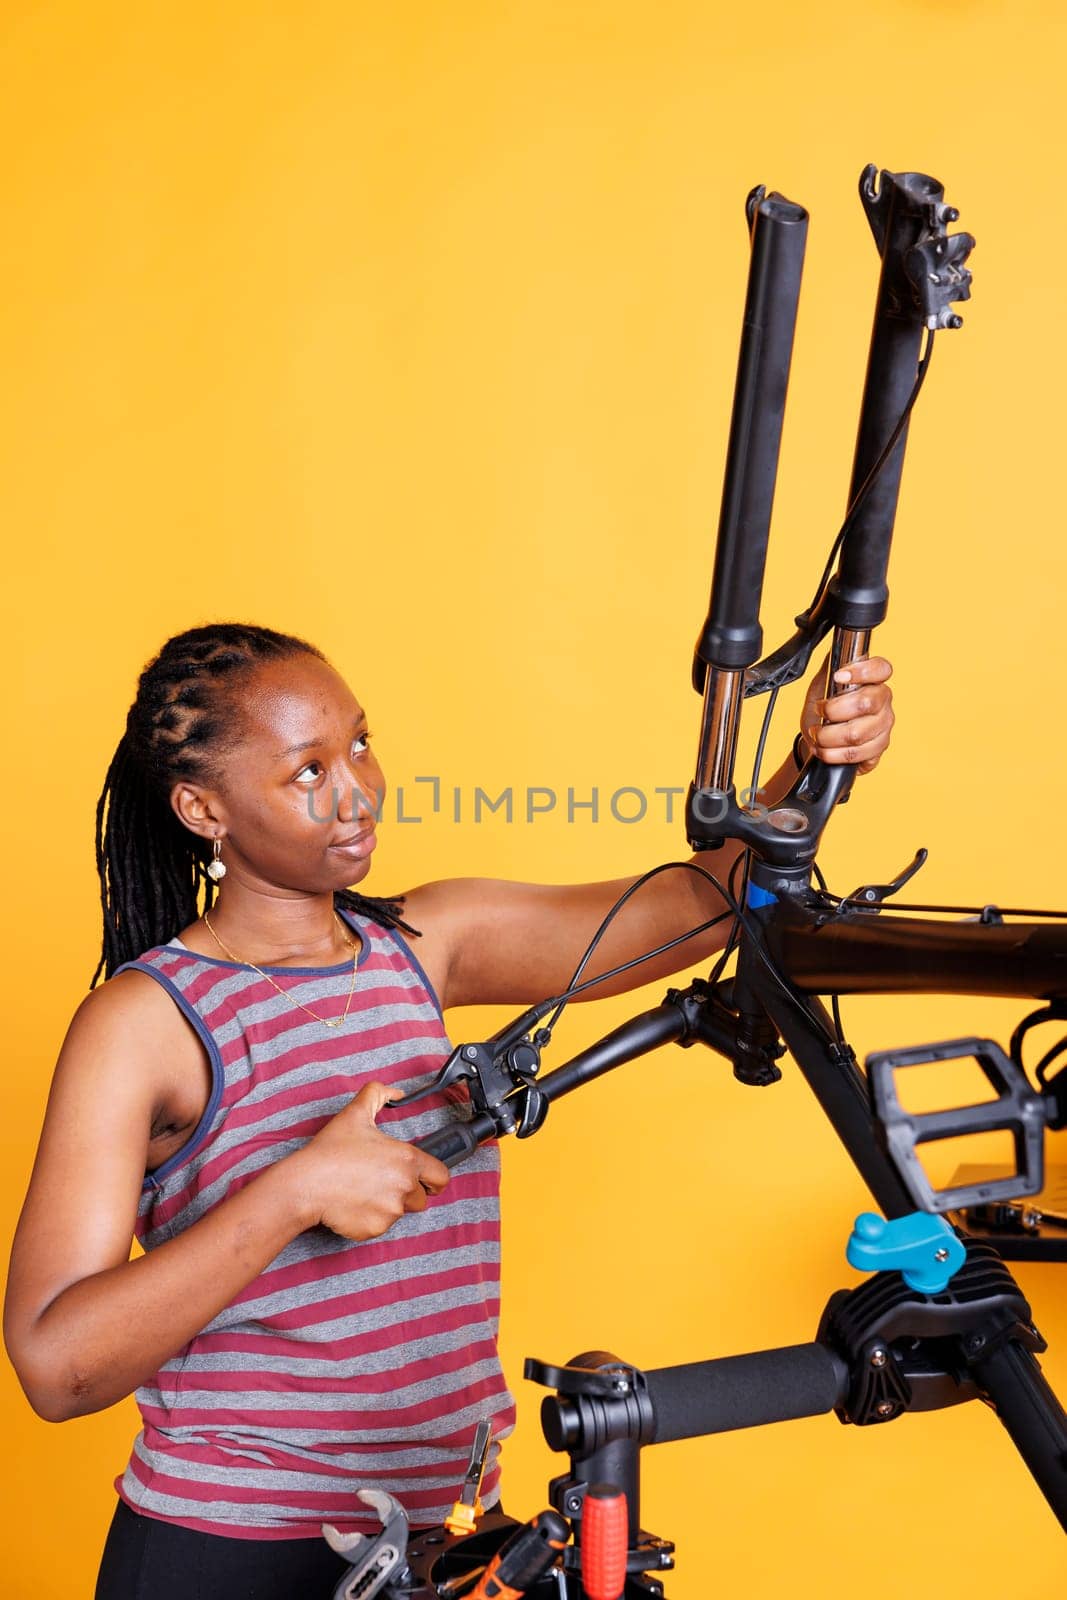 Female fixing disassembled bicycle by DCStudio